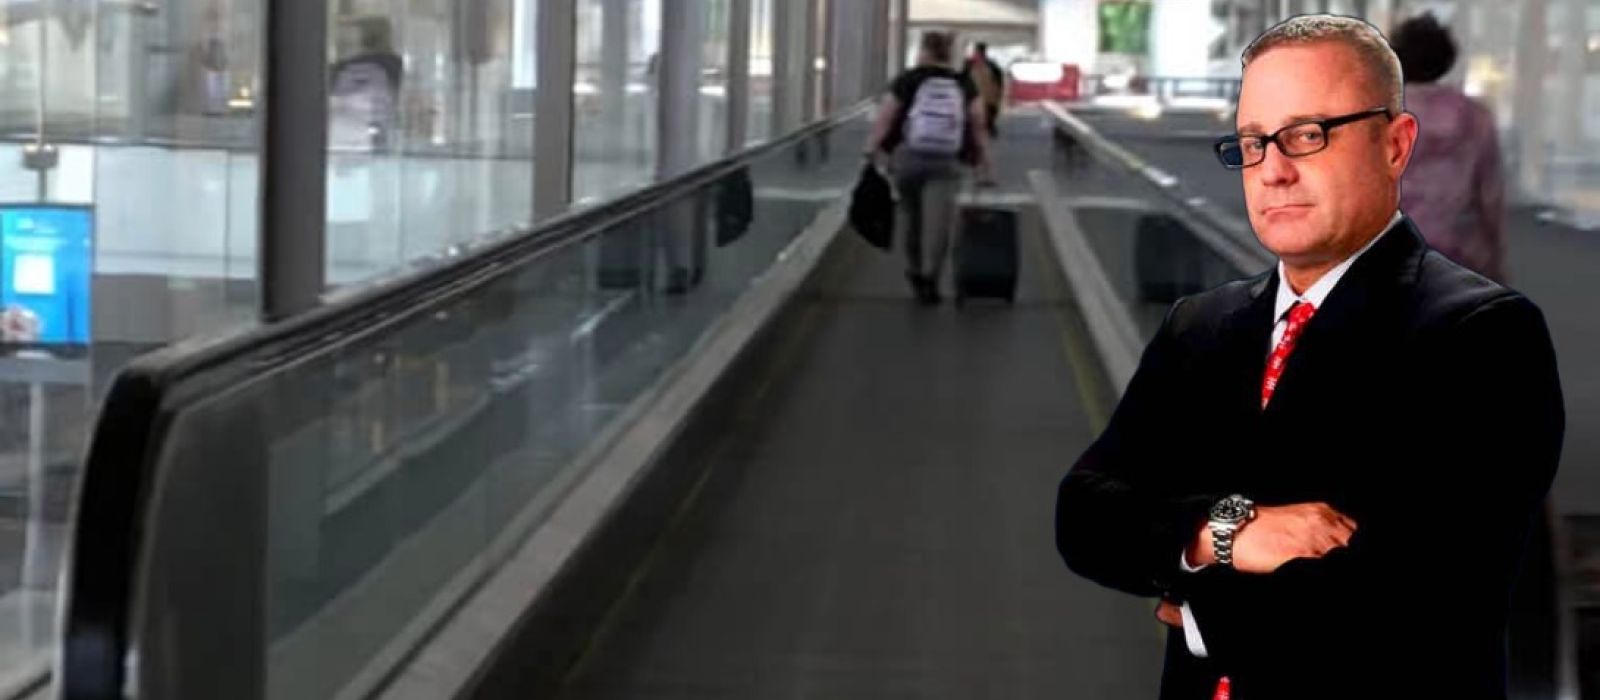 Moving Walkway Accident Attorneys in Los Angeles, CA